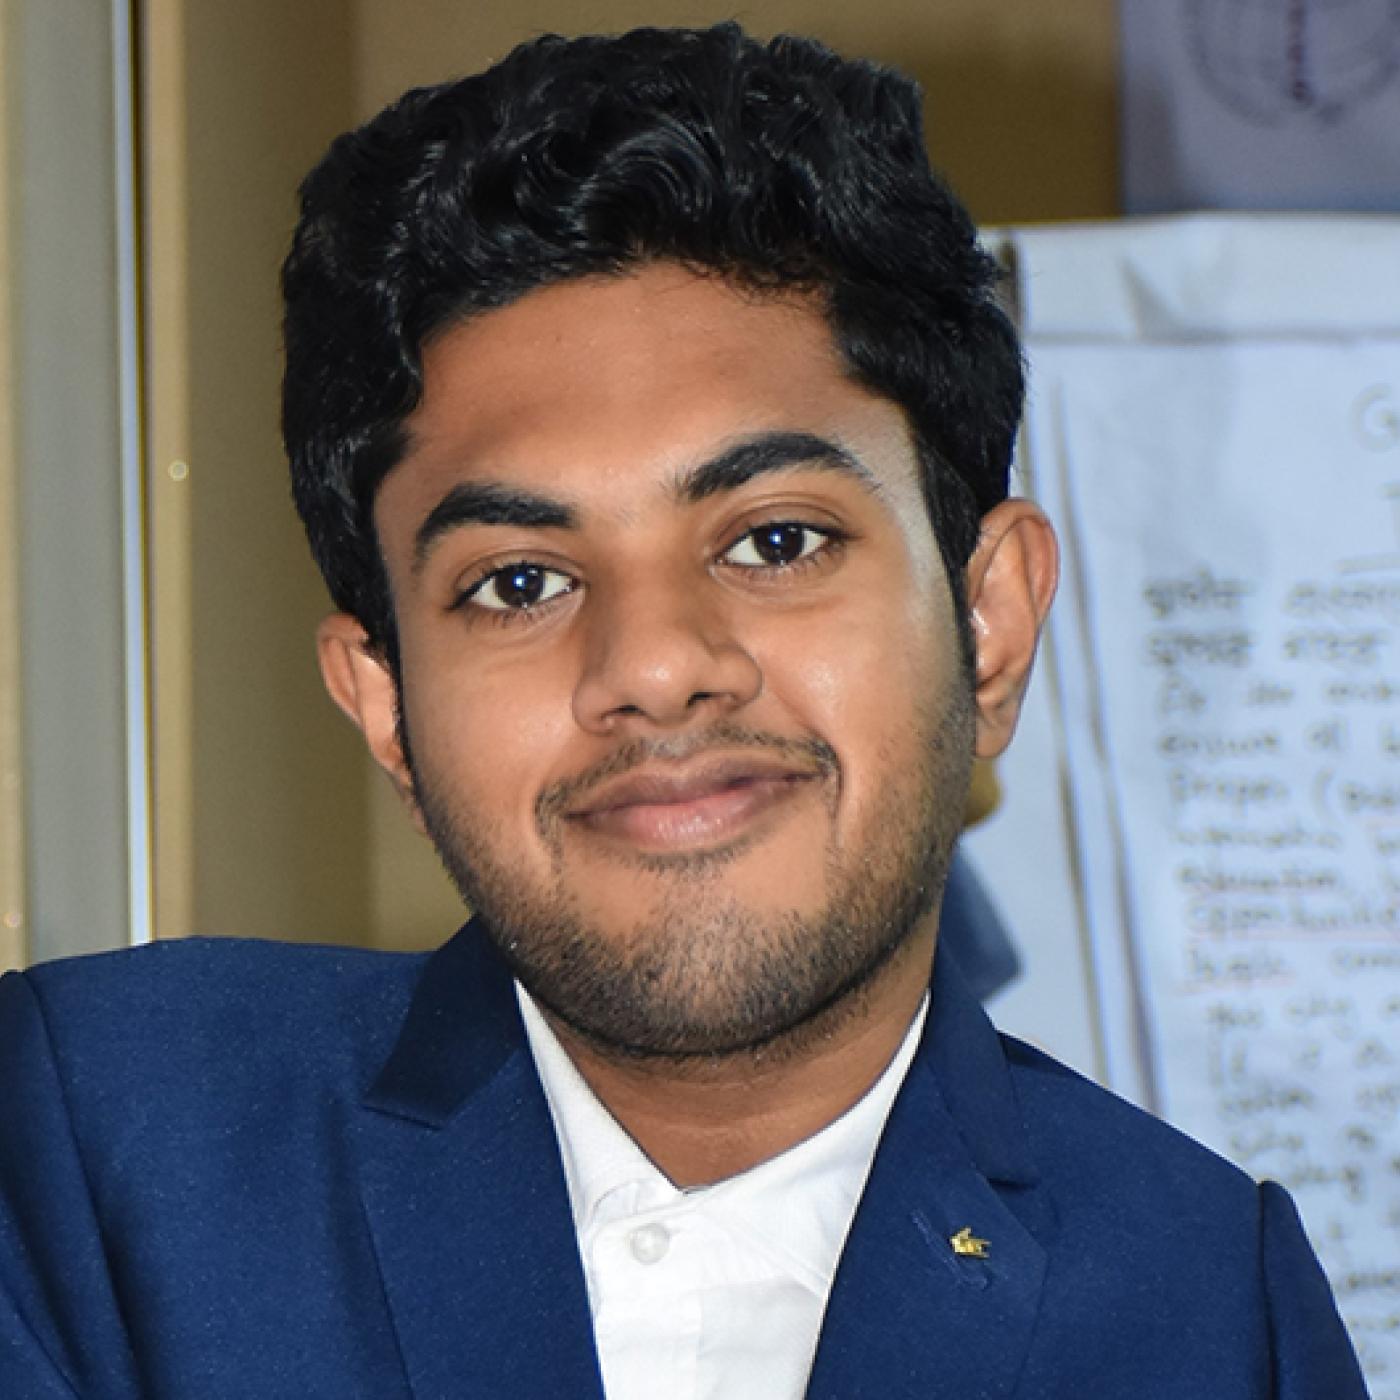 Nayem Molla, a young advocate for disability inclusion